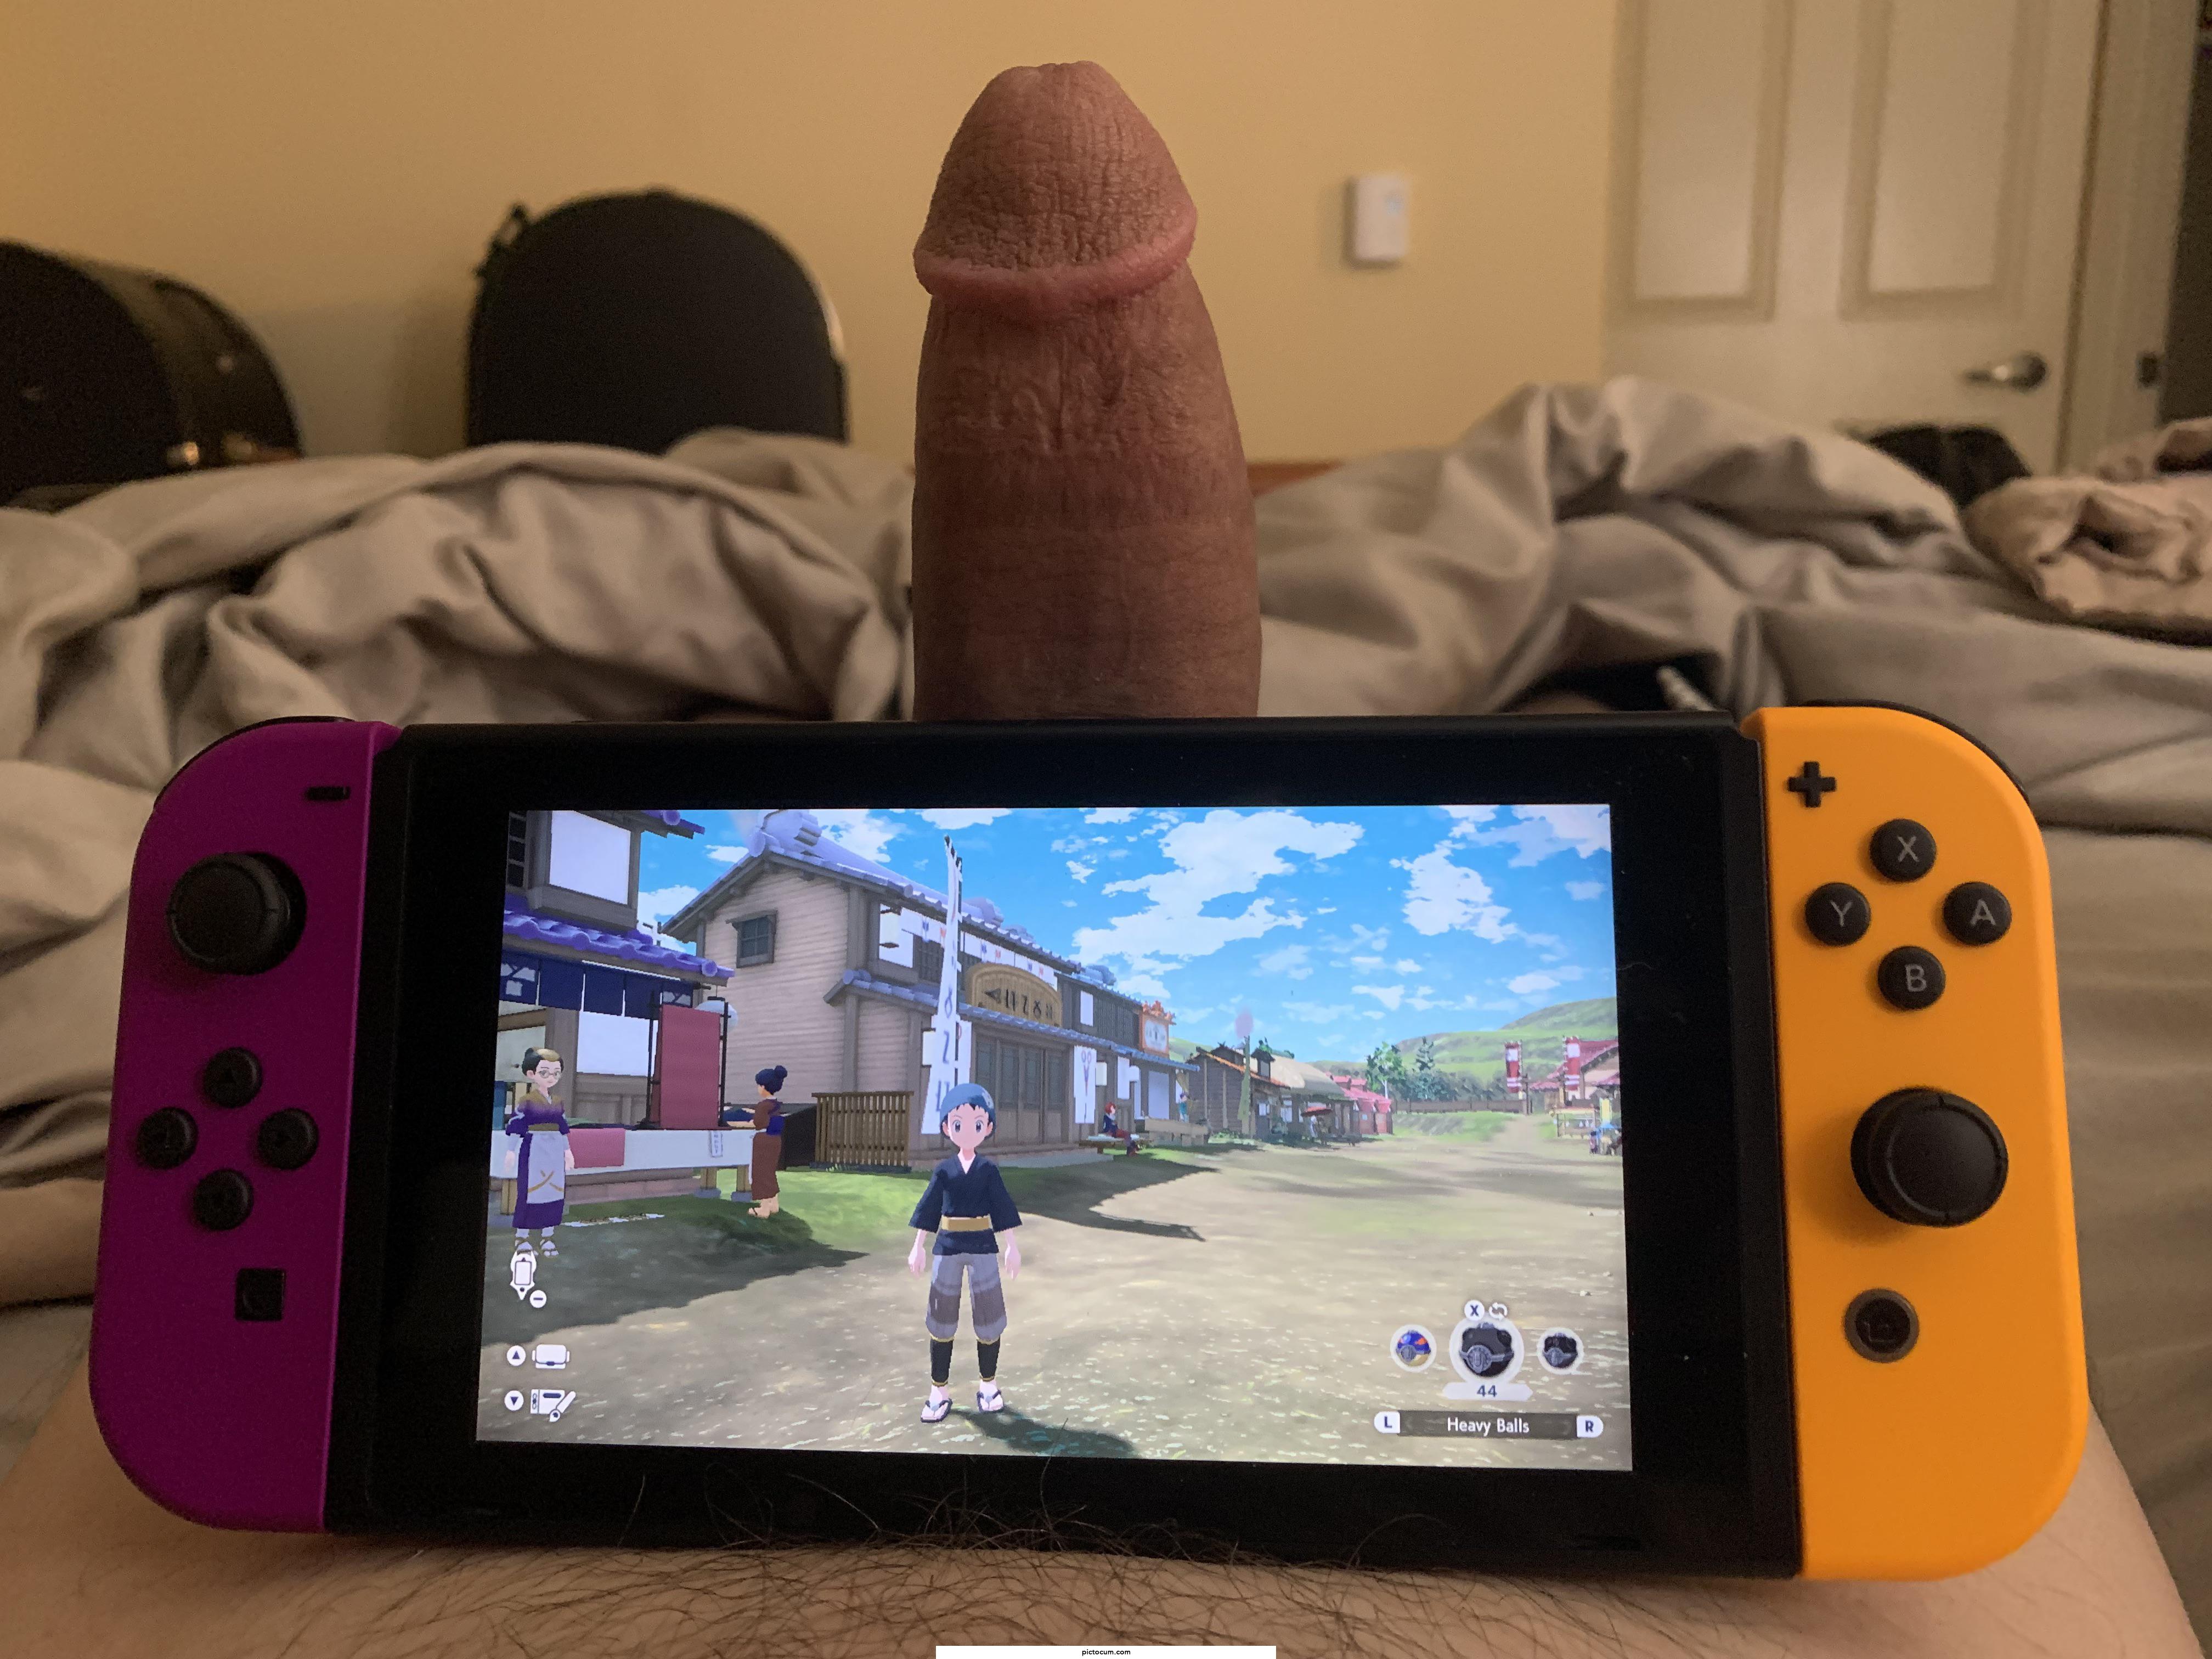 Pros of having a big dick: built in Switch stand!